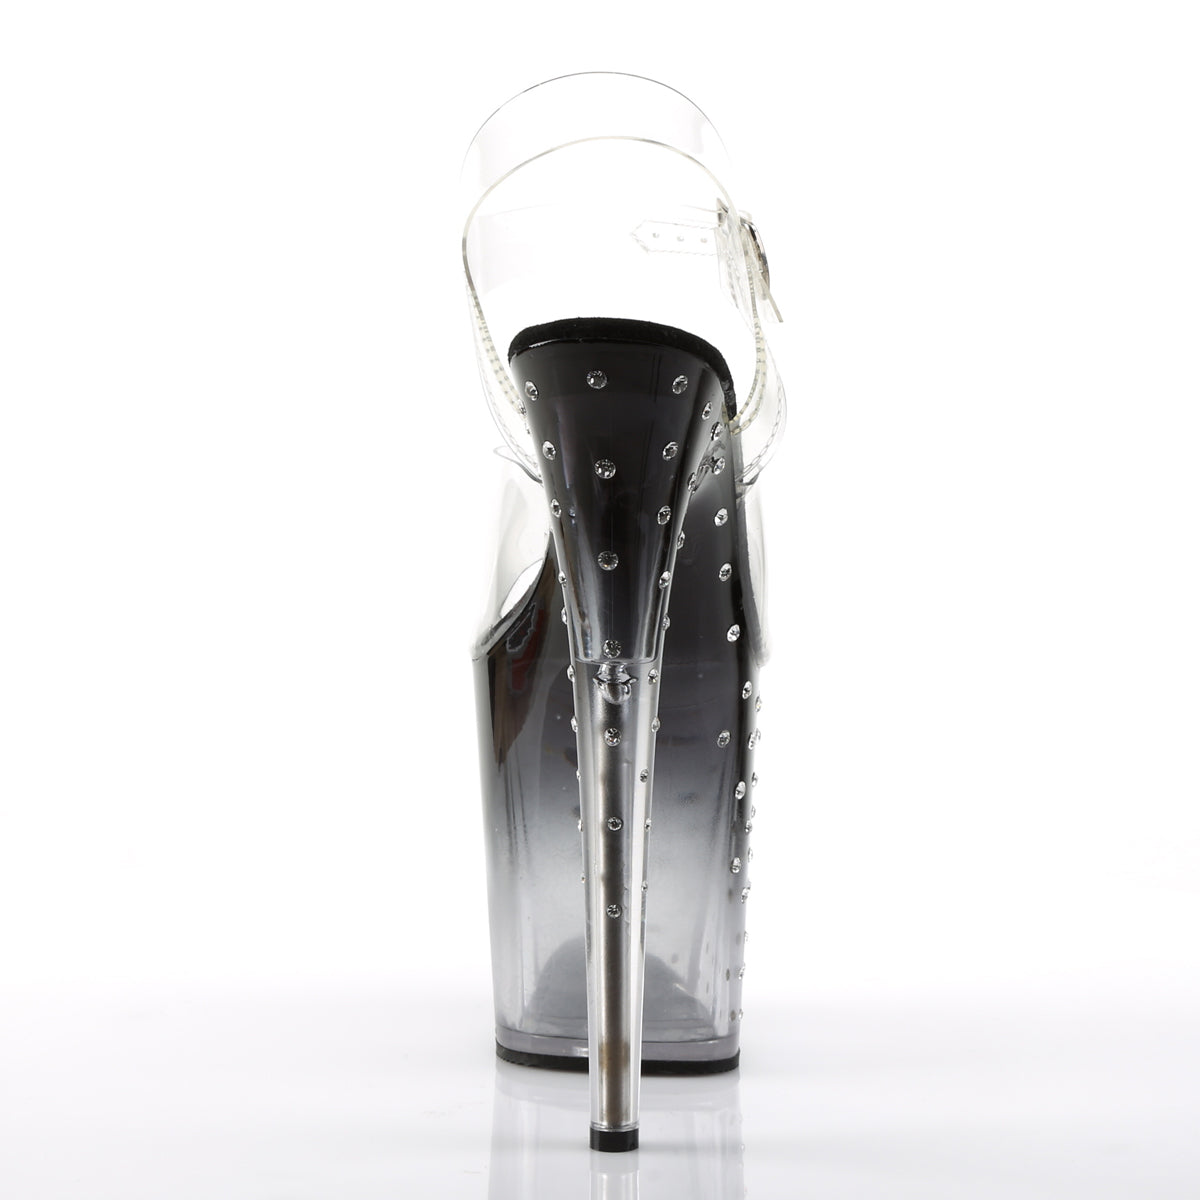 STARDUST-808T 8" Heel Clear and Black Pole Dancing Platforms-Pleaser- Sexy Shoes Fetish Footwear